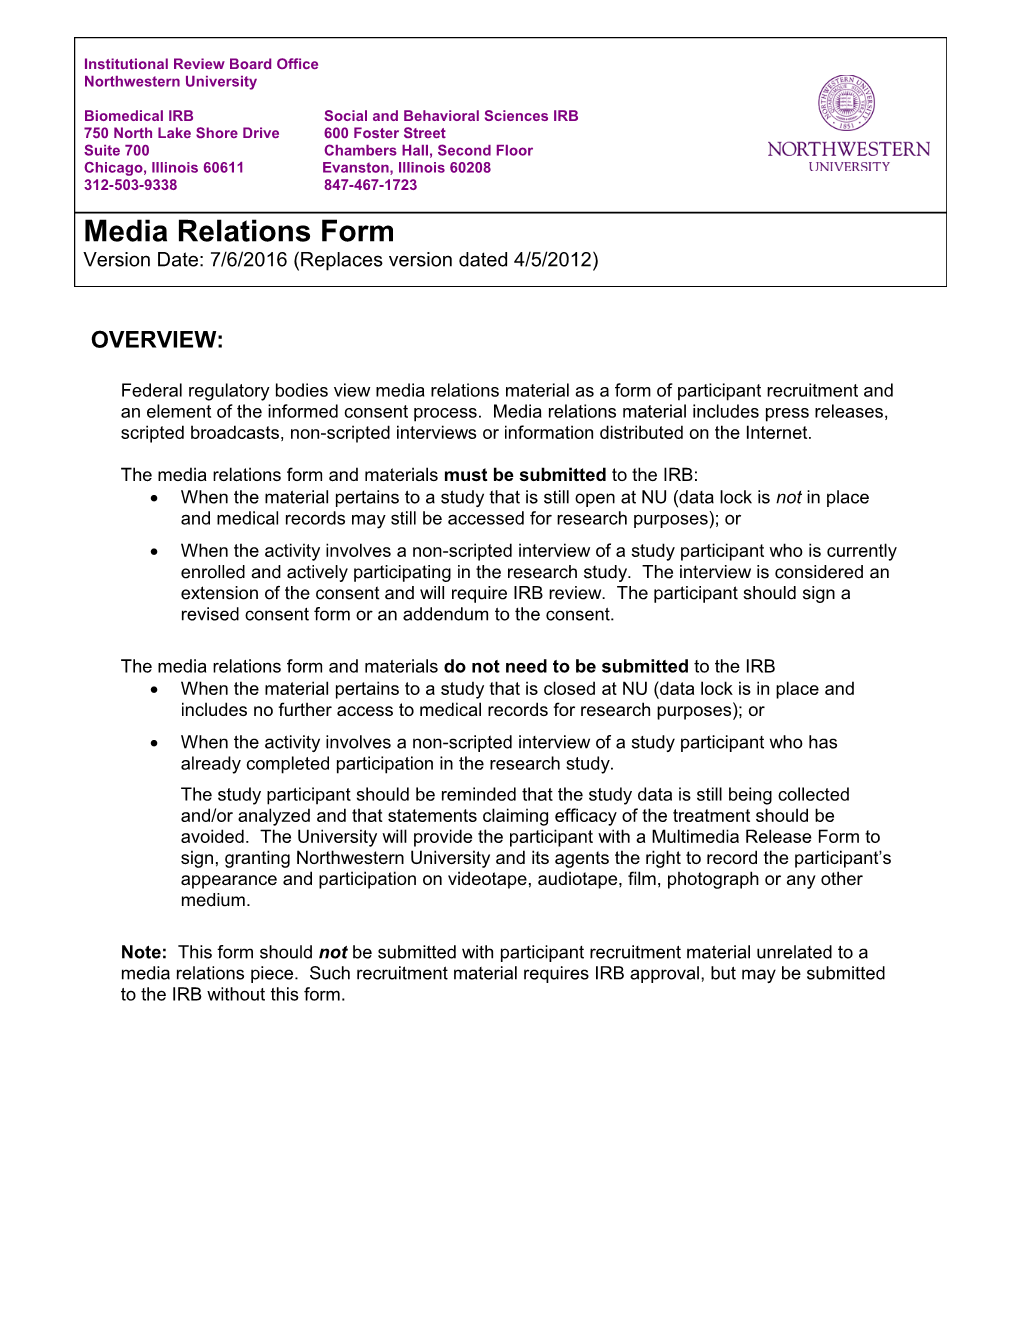 Media Relations Form and Instructions